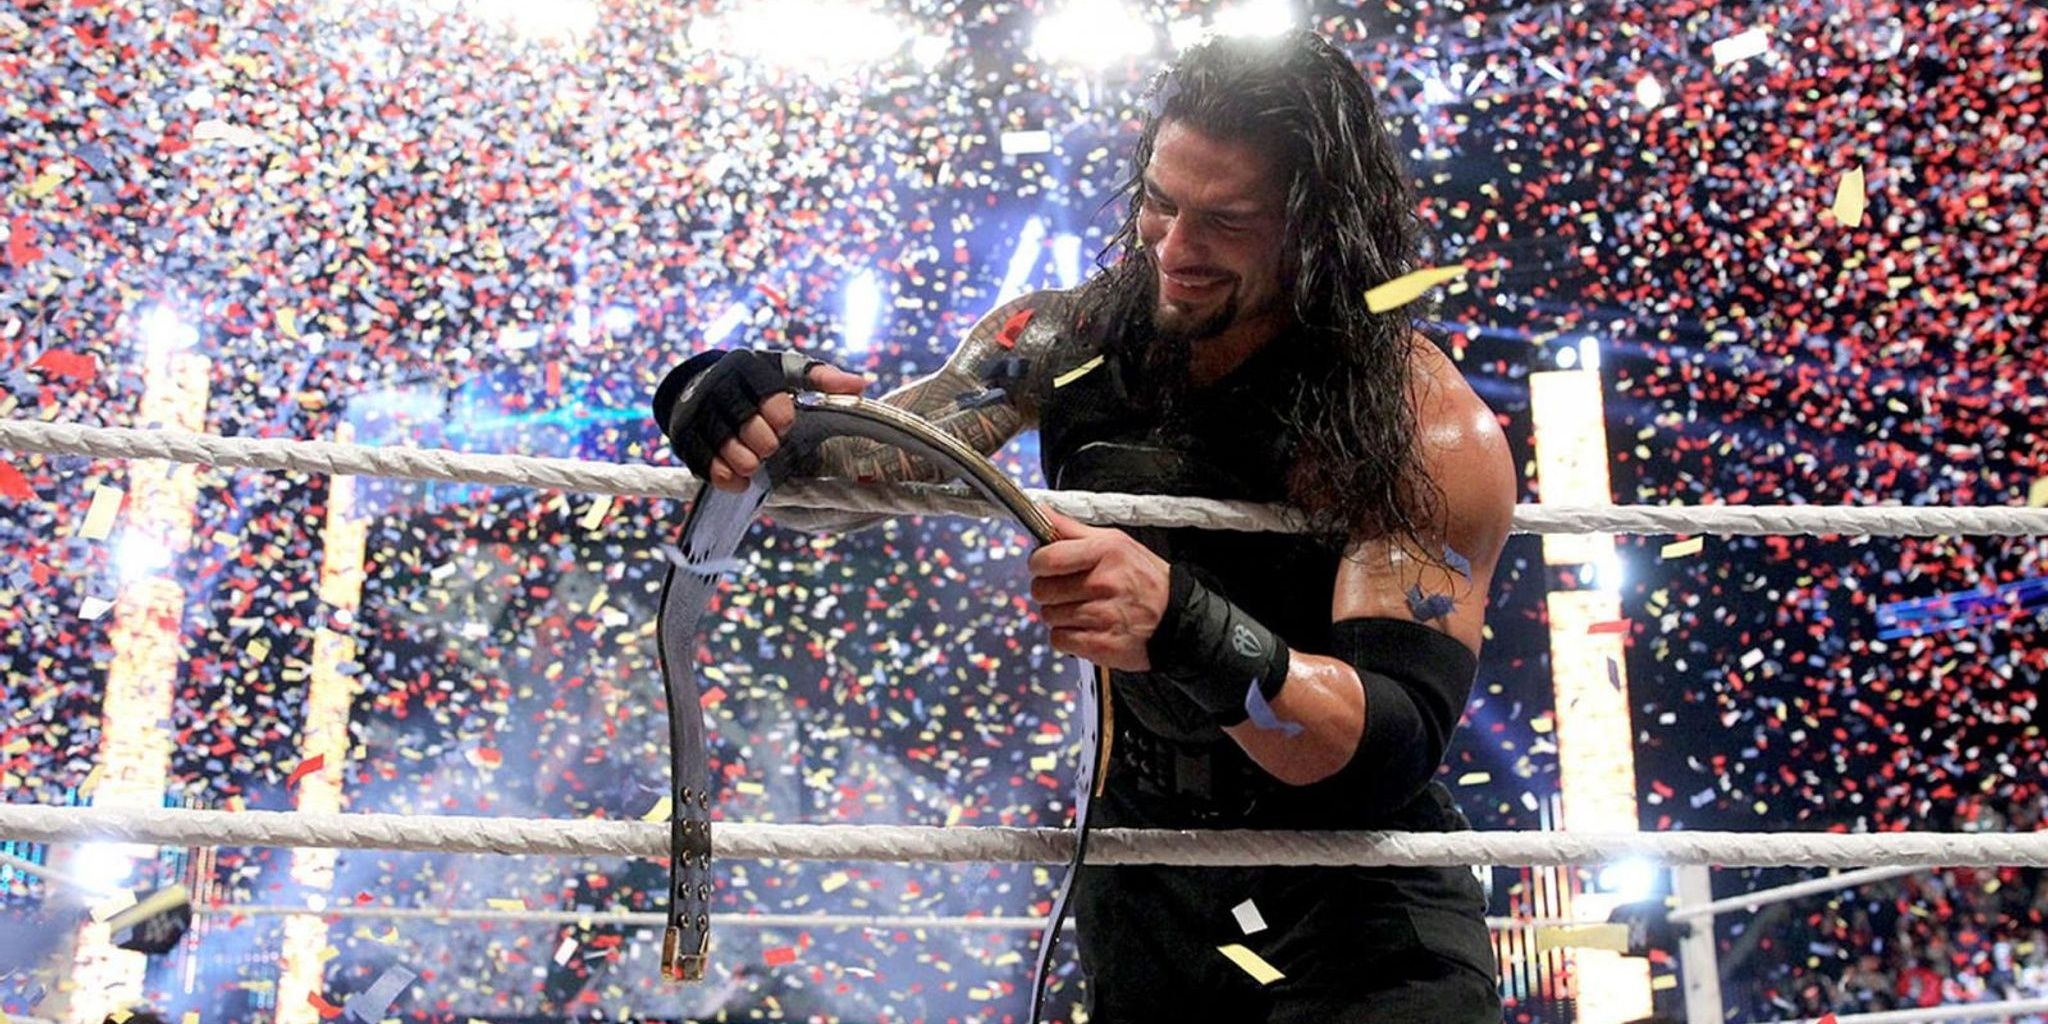 Fans hated Reigns being shoved down their throats